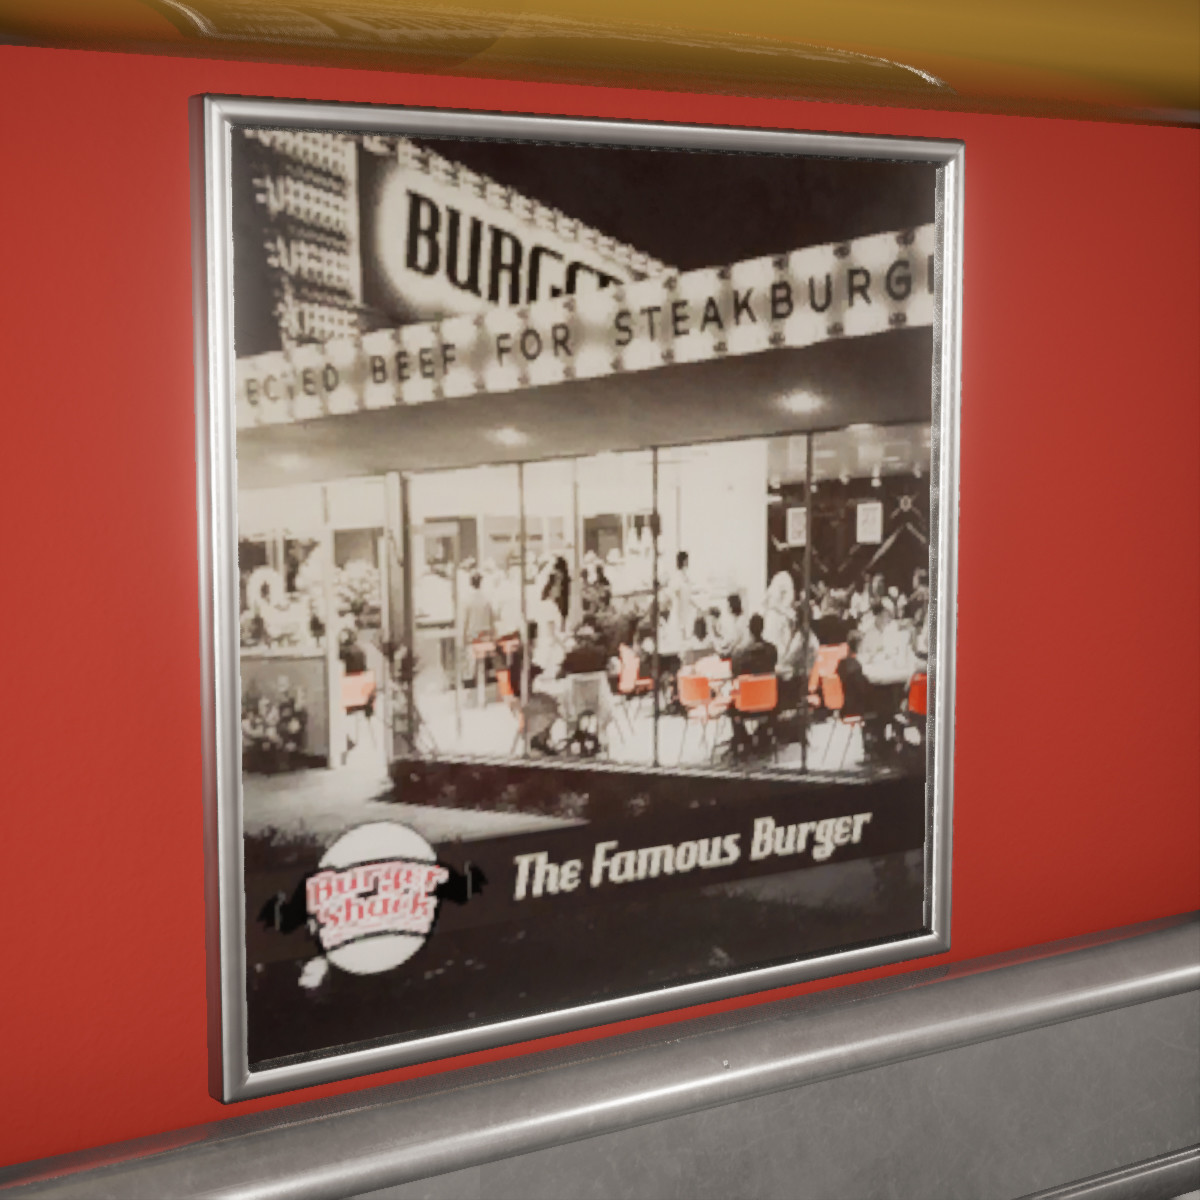 Steak and Shake poster edited to fit the "Burger Shack" brand.